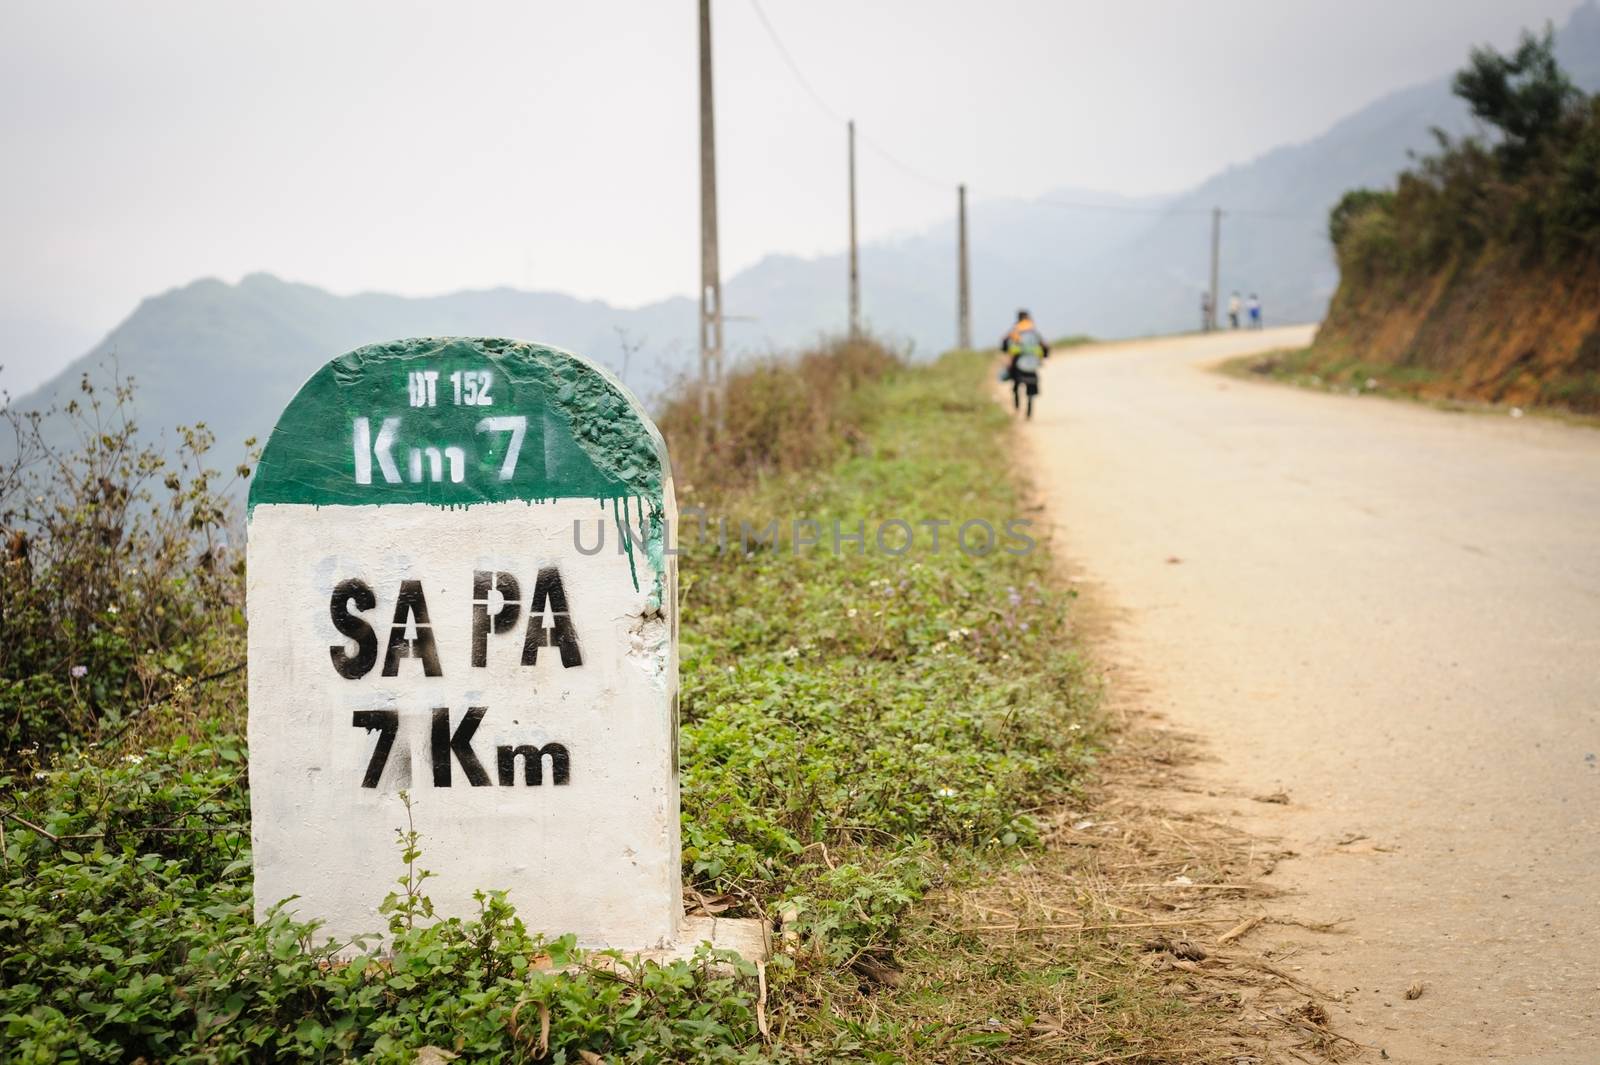 7 kilometer milestone on the highway DT 152 and direction sign to SAPA, north Vietnam.